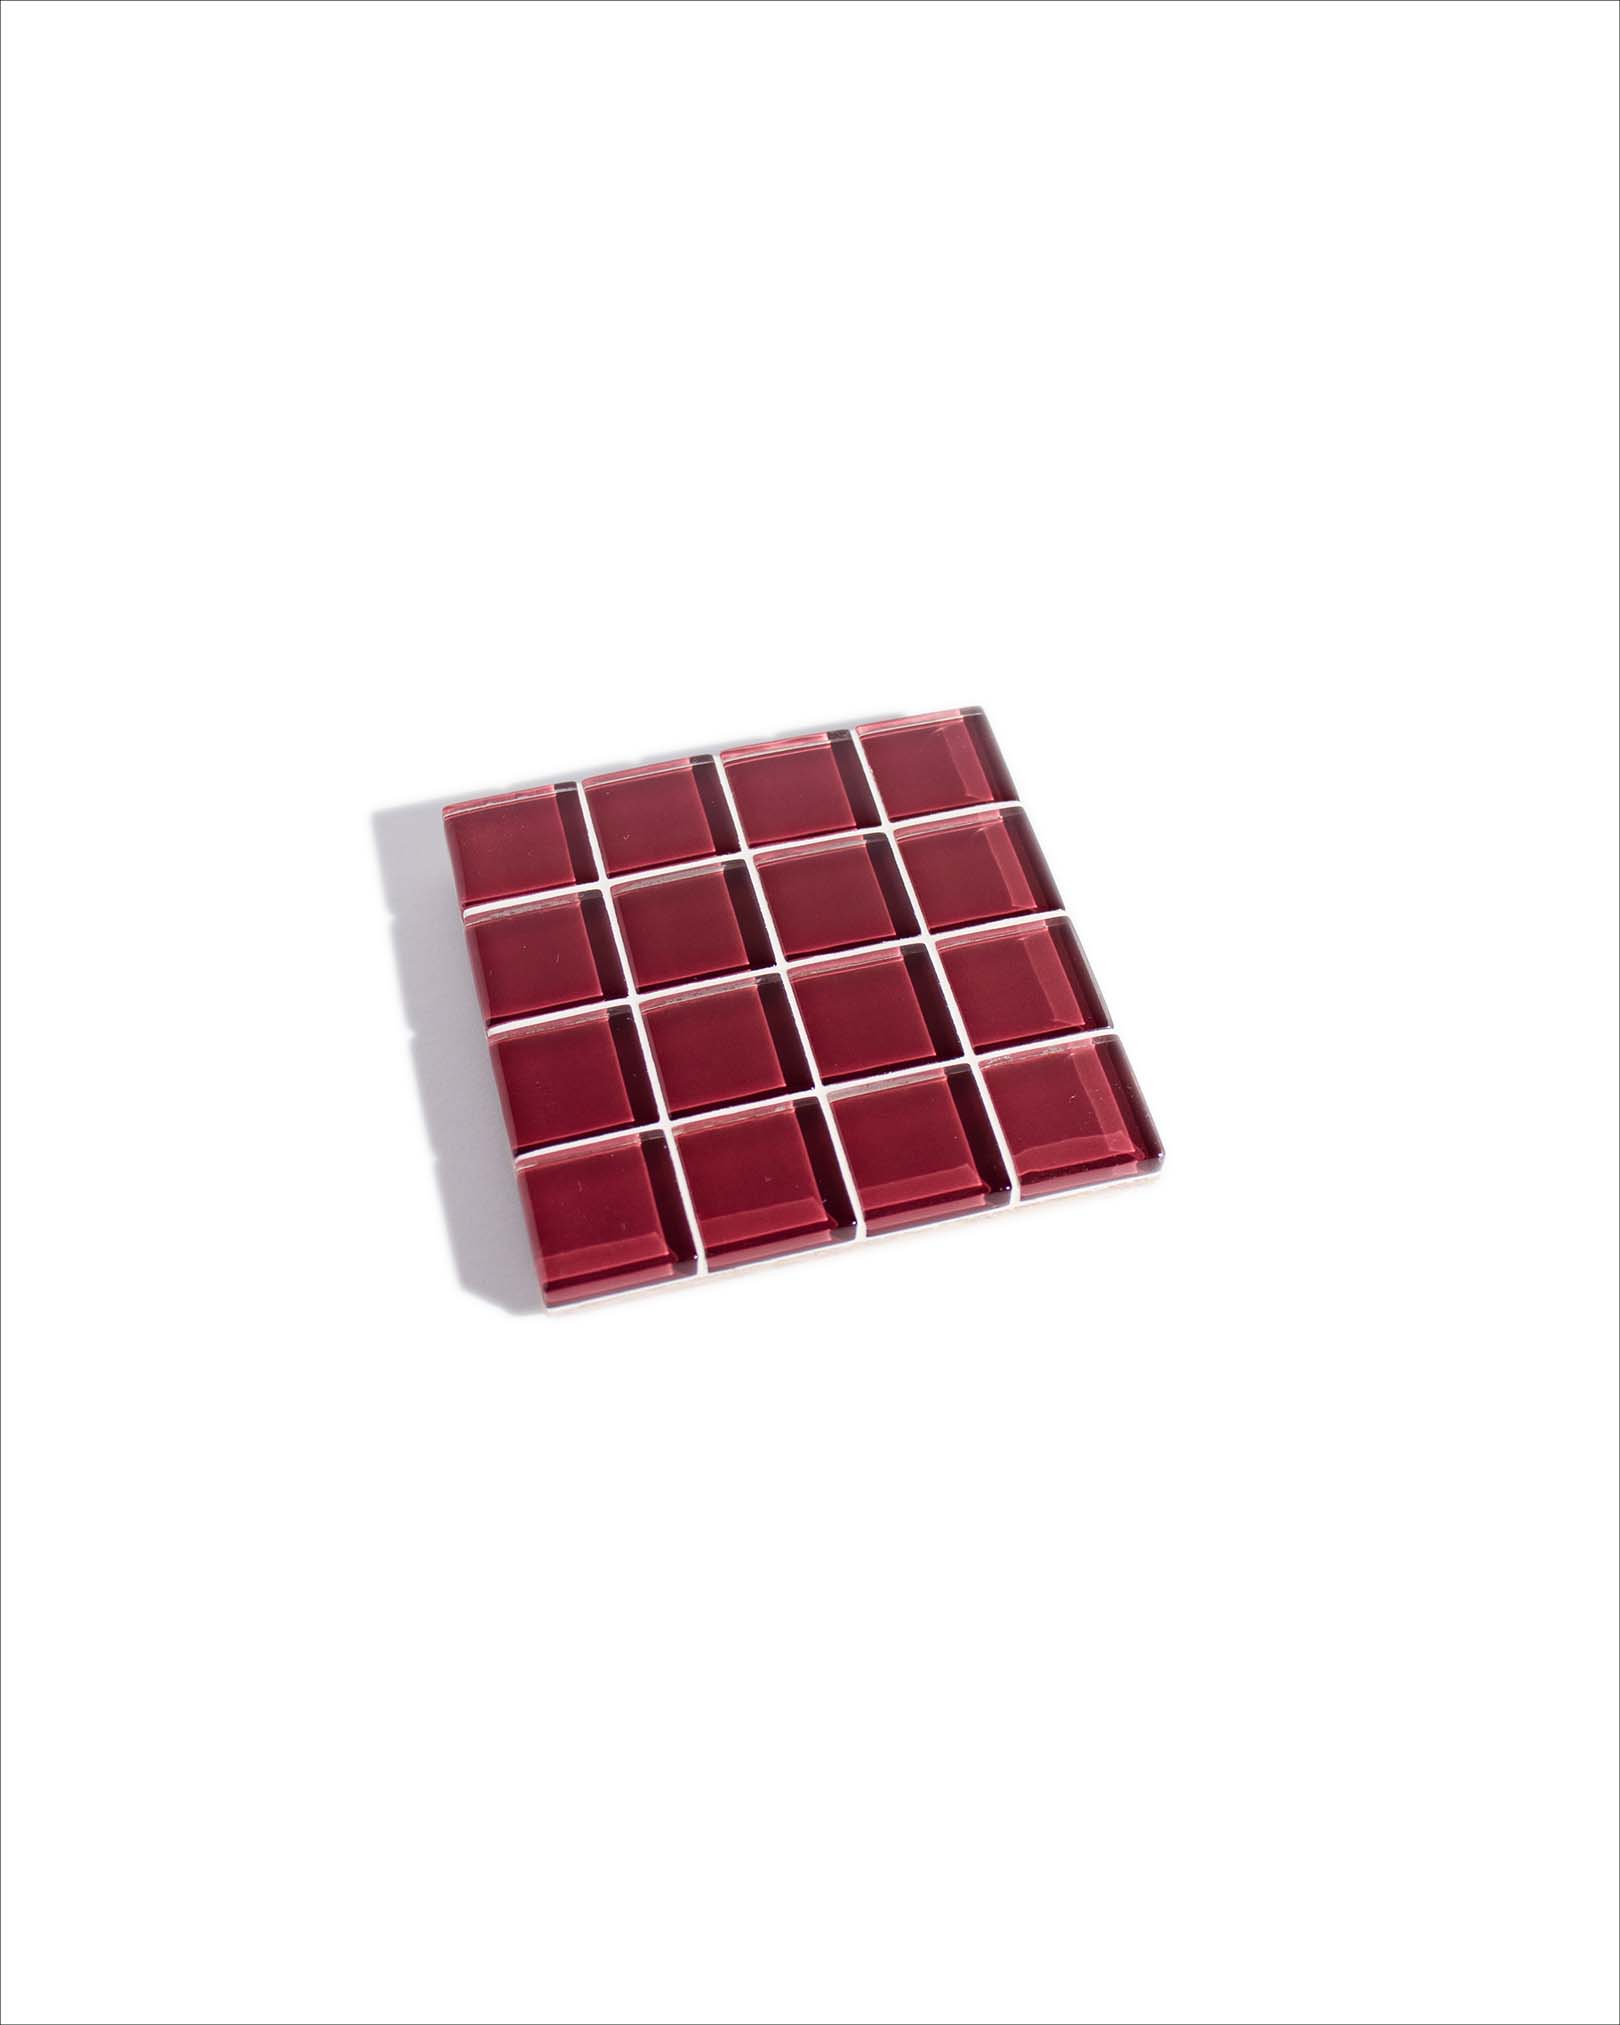 GLASS TILE COASTER - It's Mulberry